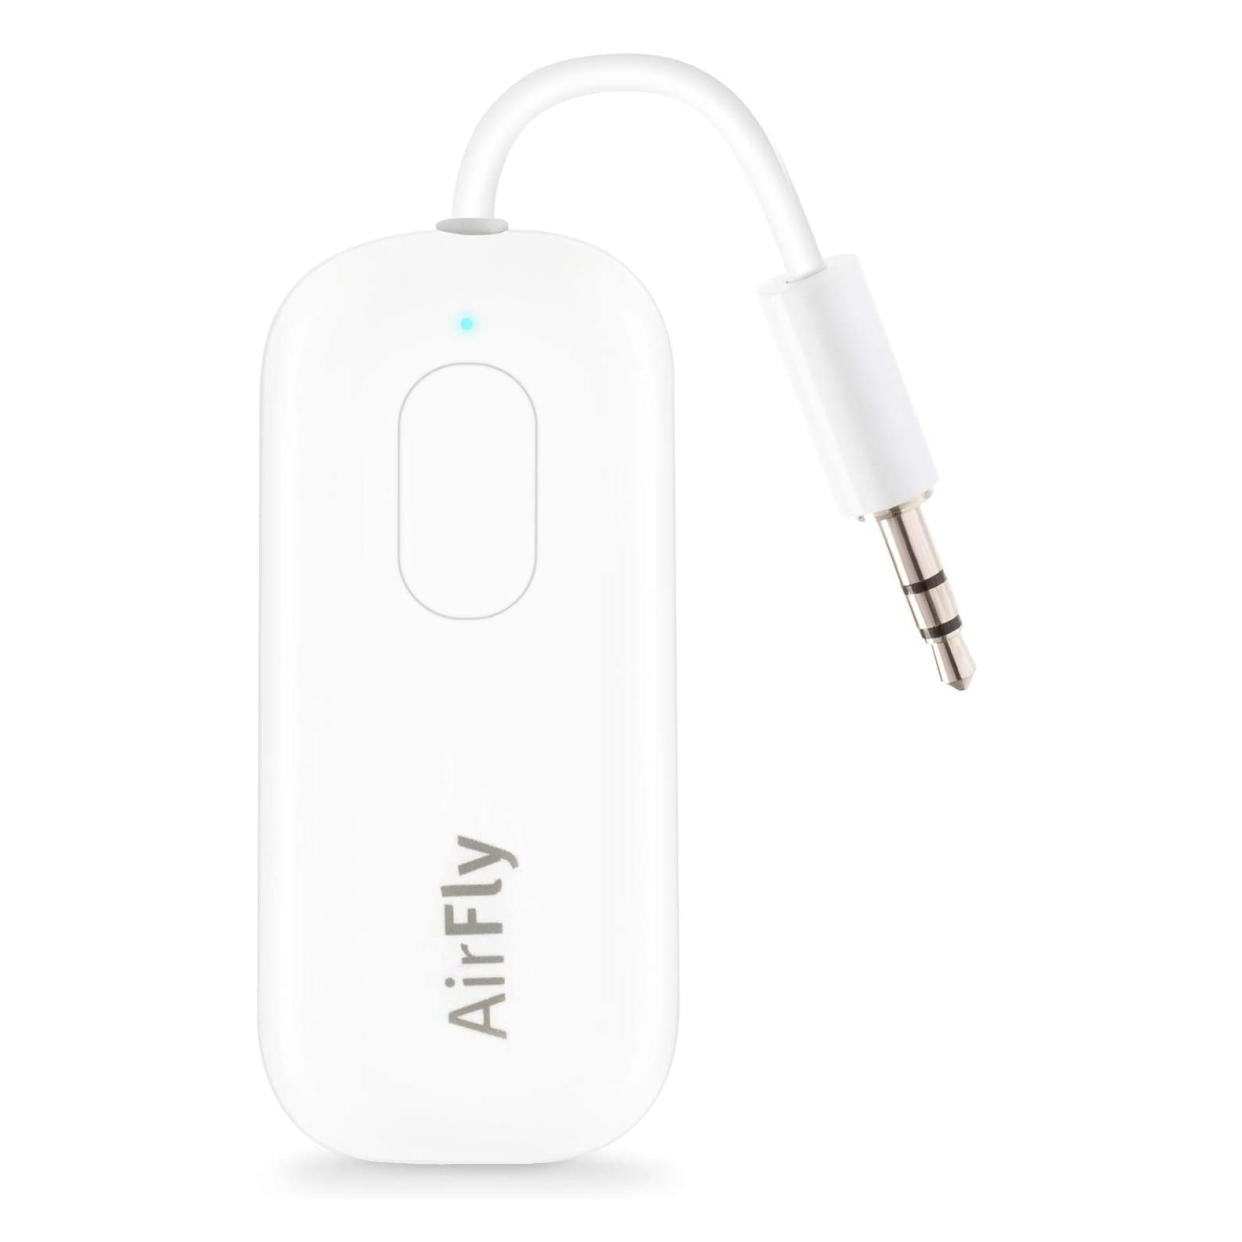 AirFly wireless converter, best last minute gifts